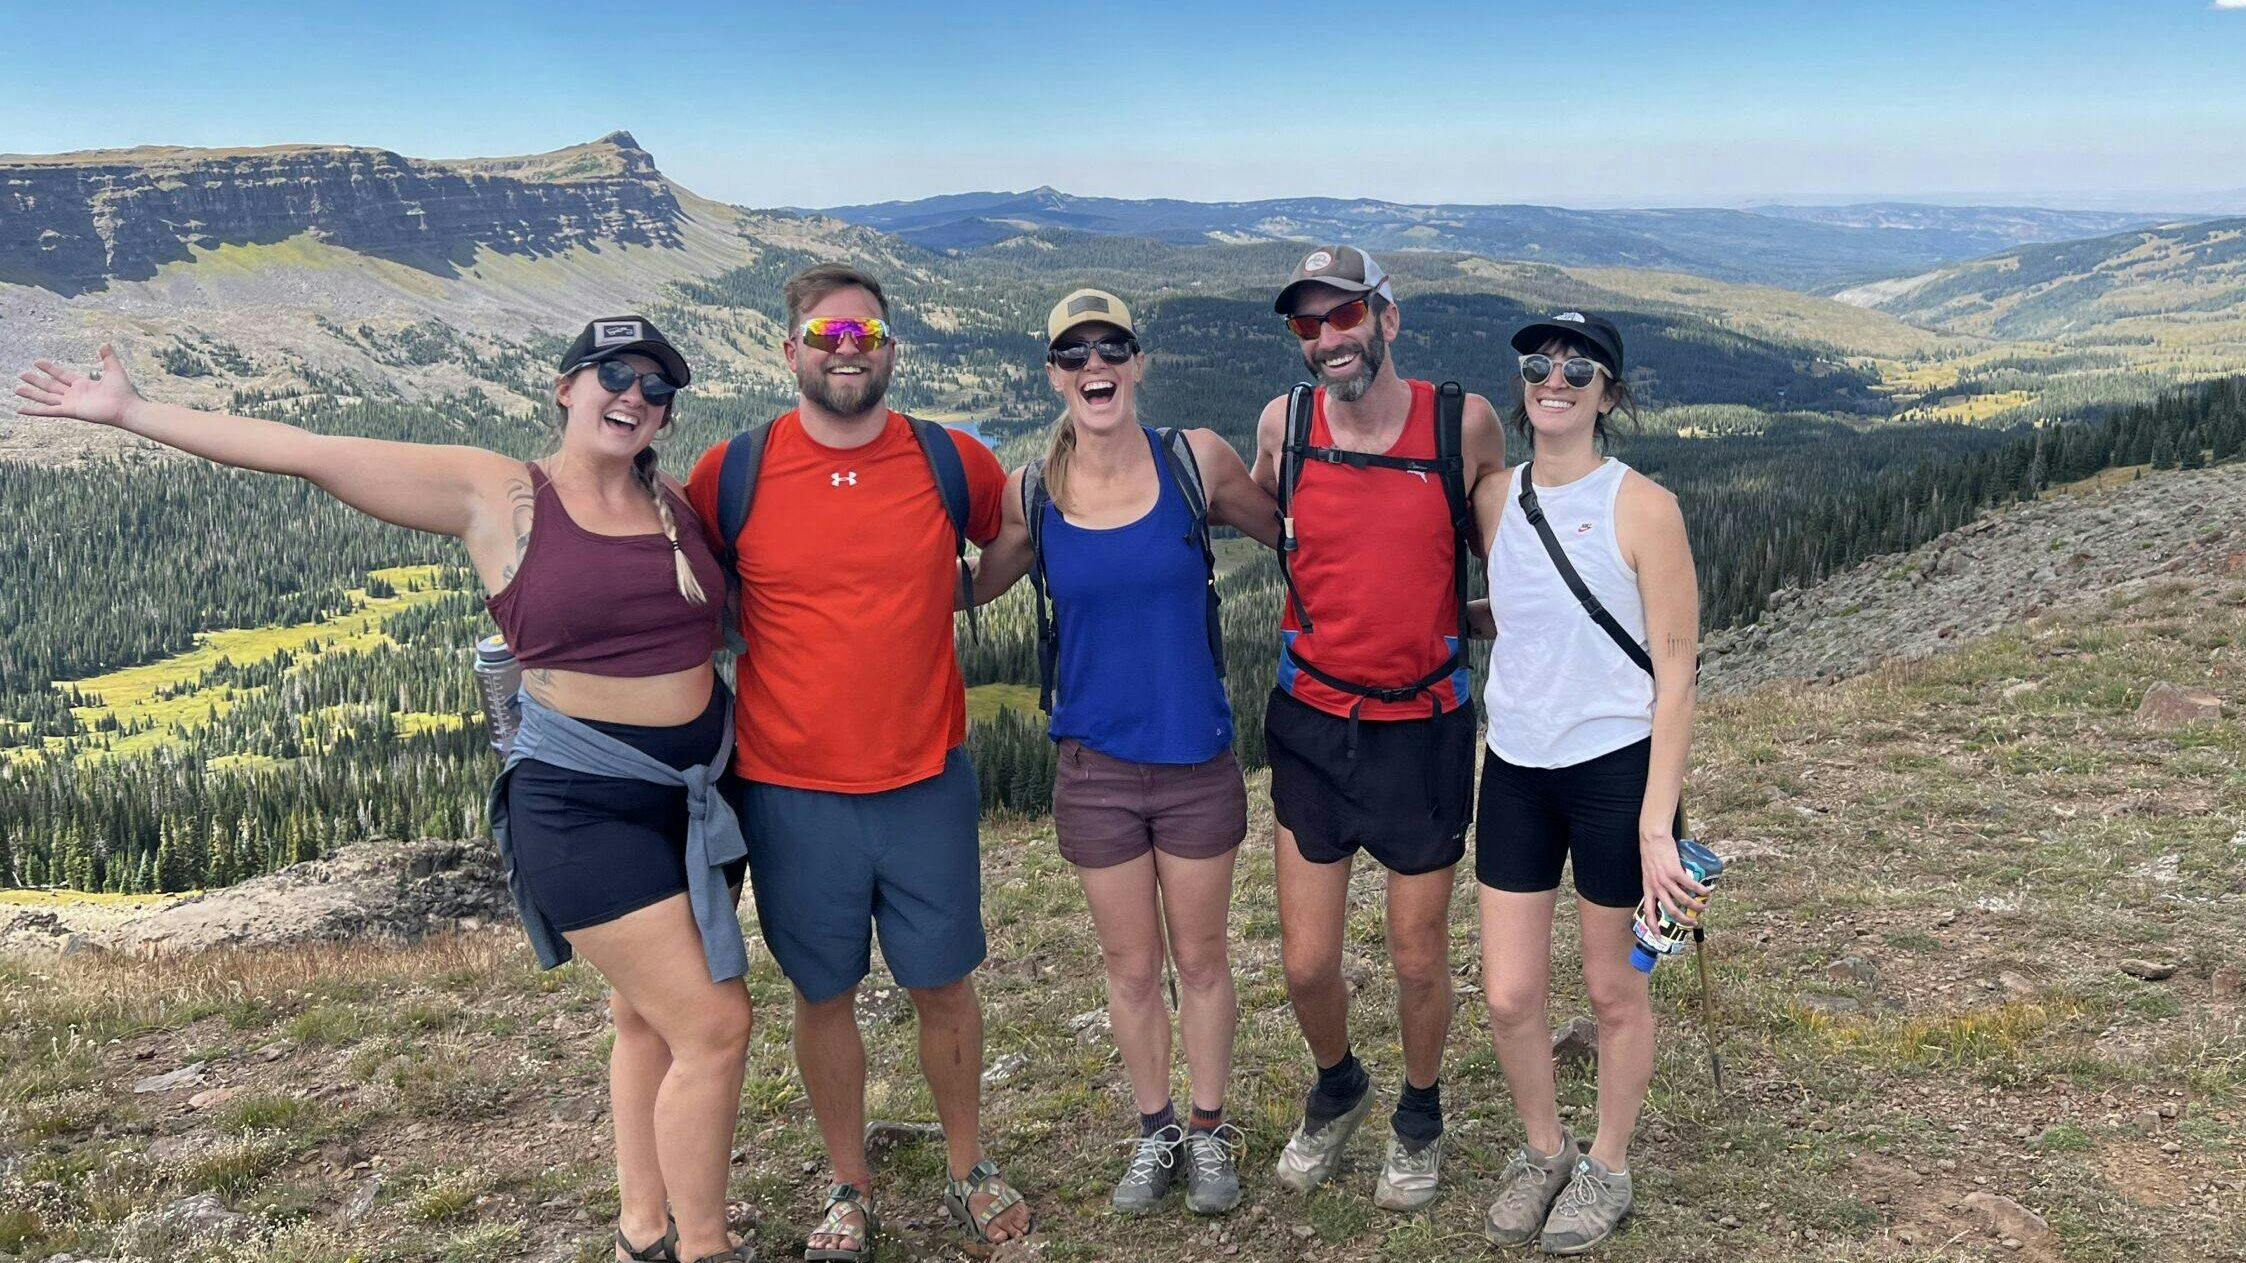 Five people standing on a mountain trail with a scenic view of valleys, hills, and a clear blue sky in the background. Some are wearing sunglasses and hats, and a few are smiling with arms around each other in Denver, Colorado